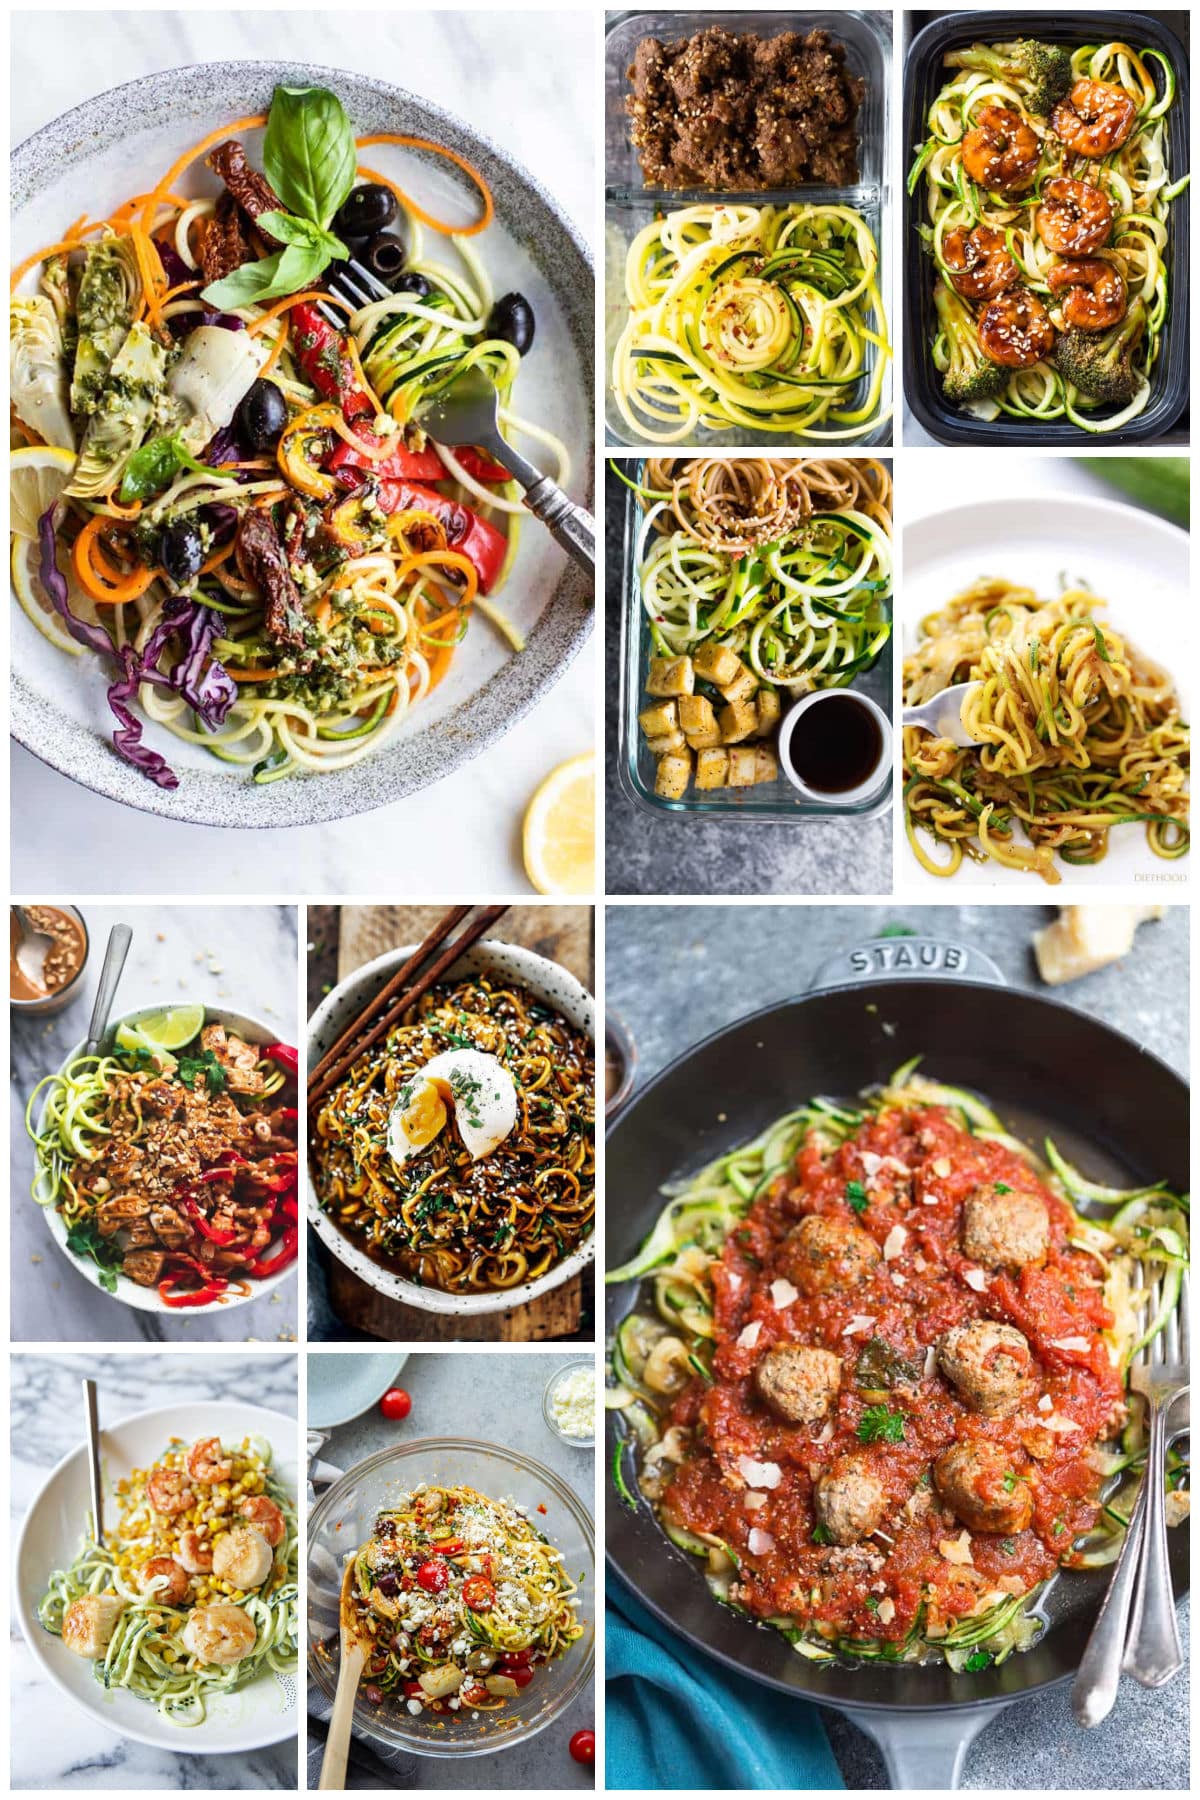 A group of lighter zucchini noodle recipes like sesame ginger zucchini noodles, shrimp teriyaki zoodles and Mediterranean zucchini noodle salad.